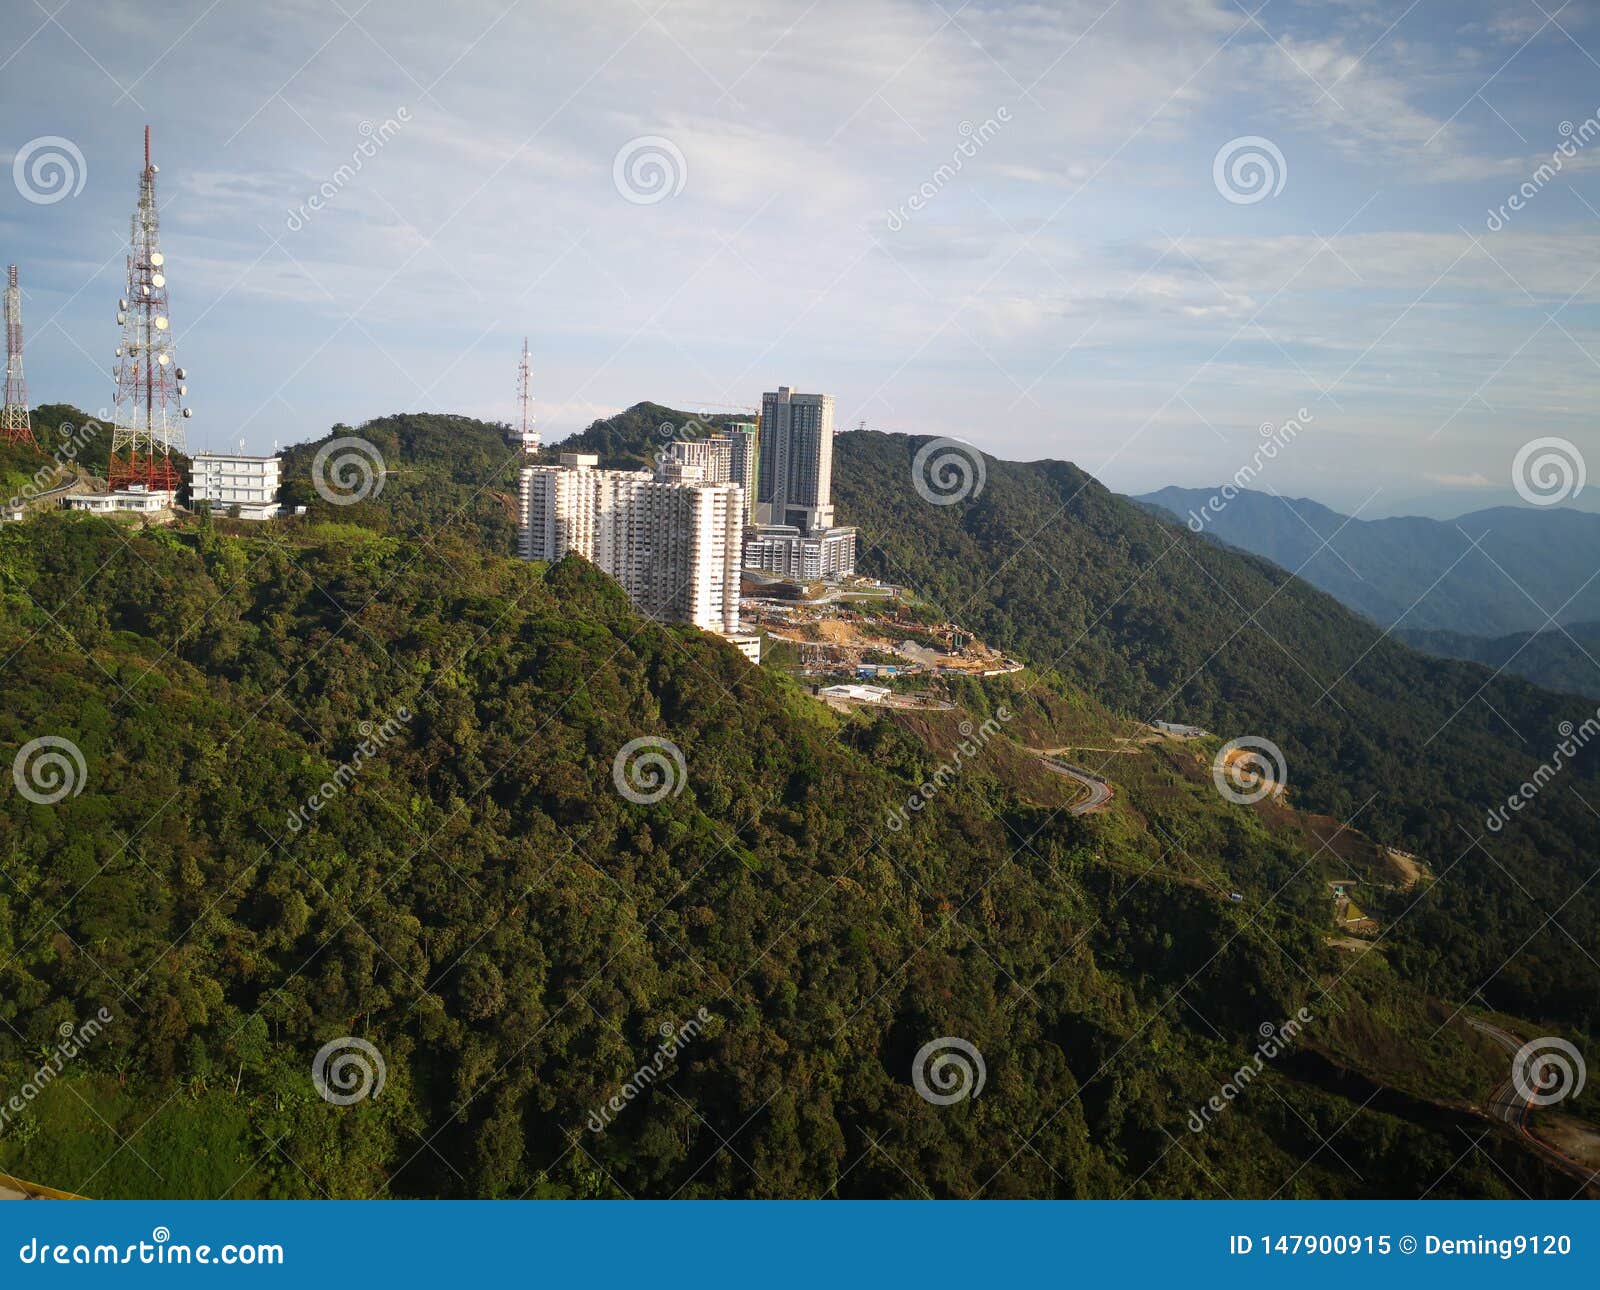 Amber Court Hotel In Genting Highlands Pahang Malaysia Editorial Image Image Of Court Comples 147900915